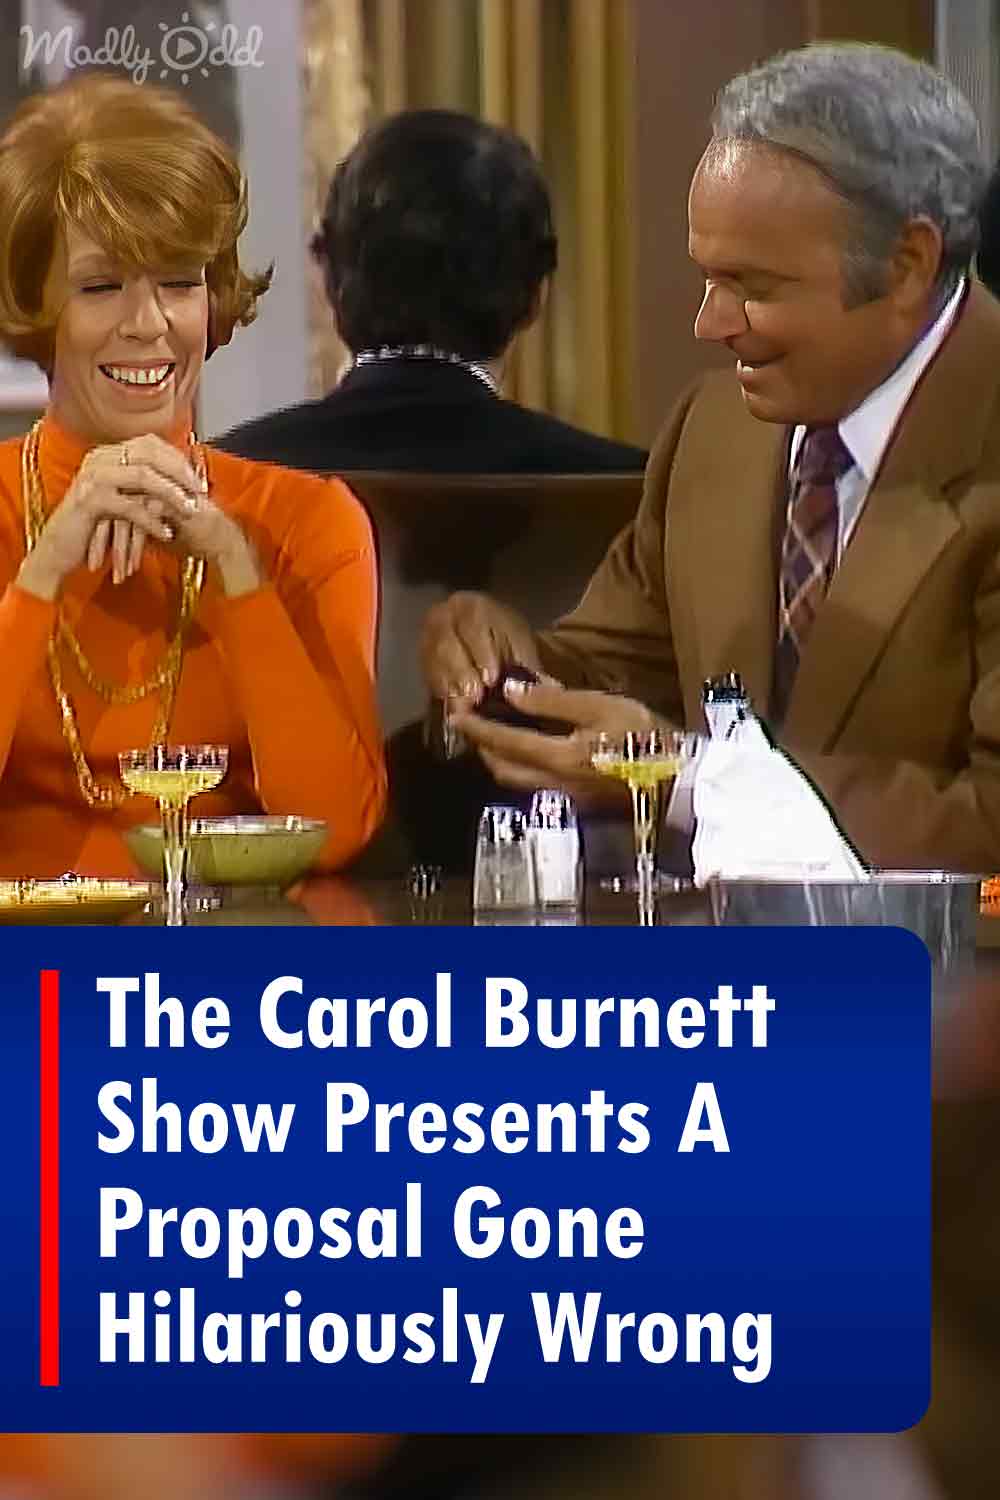 The Carol Burnett Show Presents A Proposal Gone Hilariously Wrong